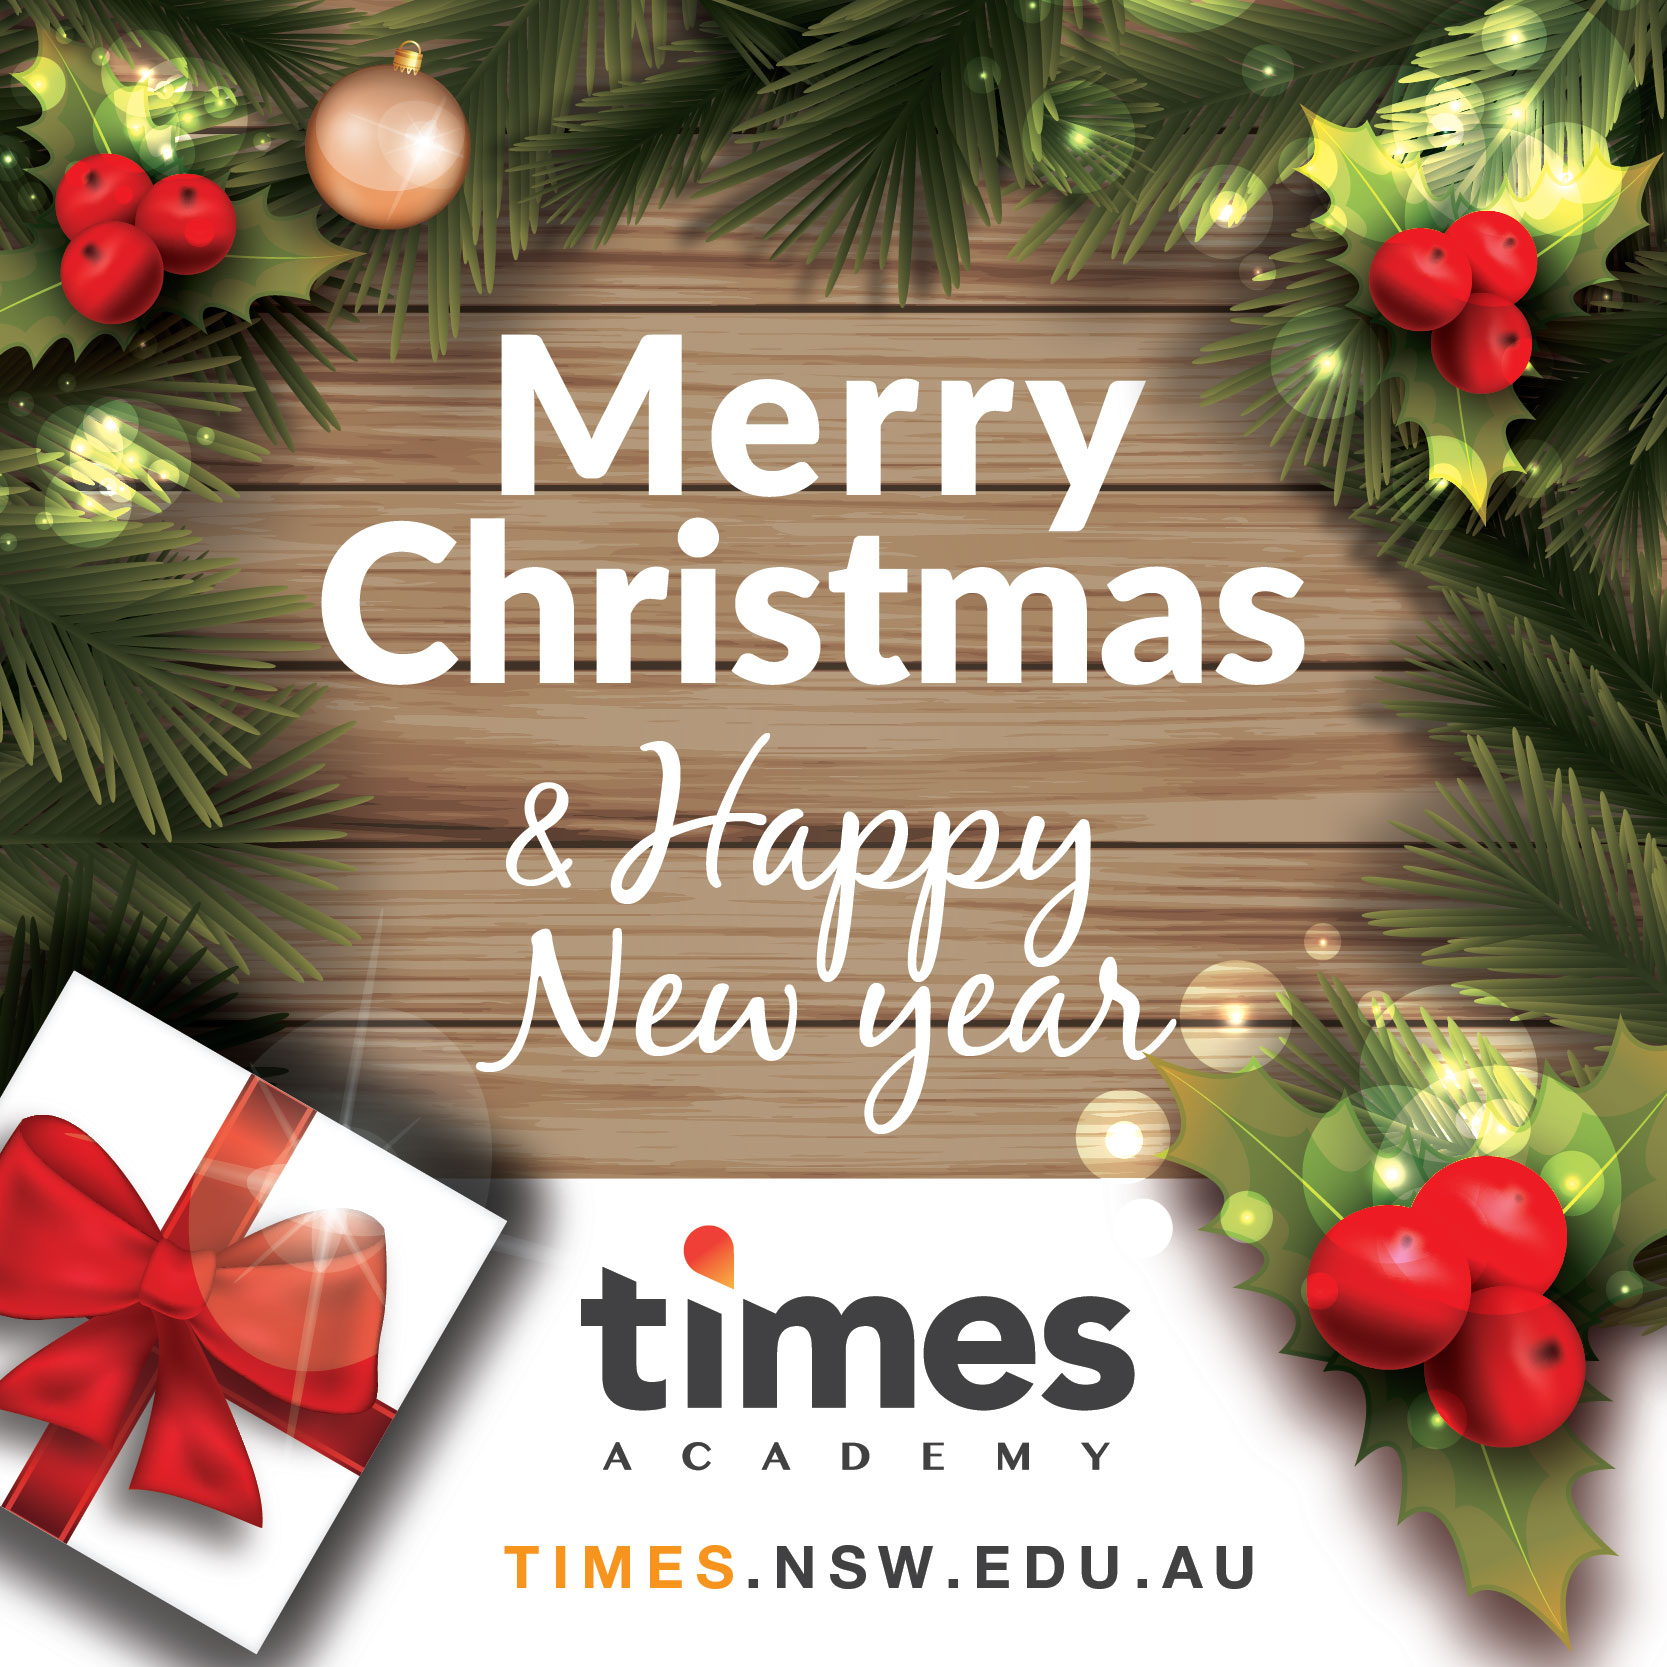 Times Academy wishes you a Merry Christmas and Happy New Year ...